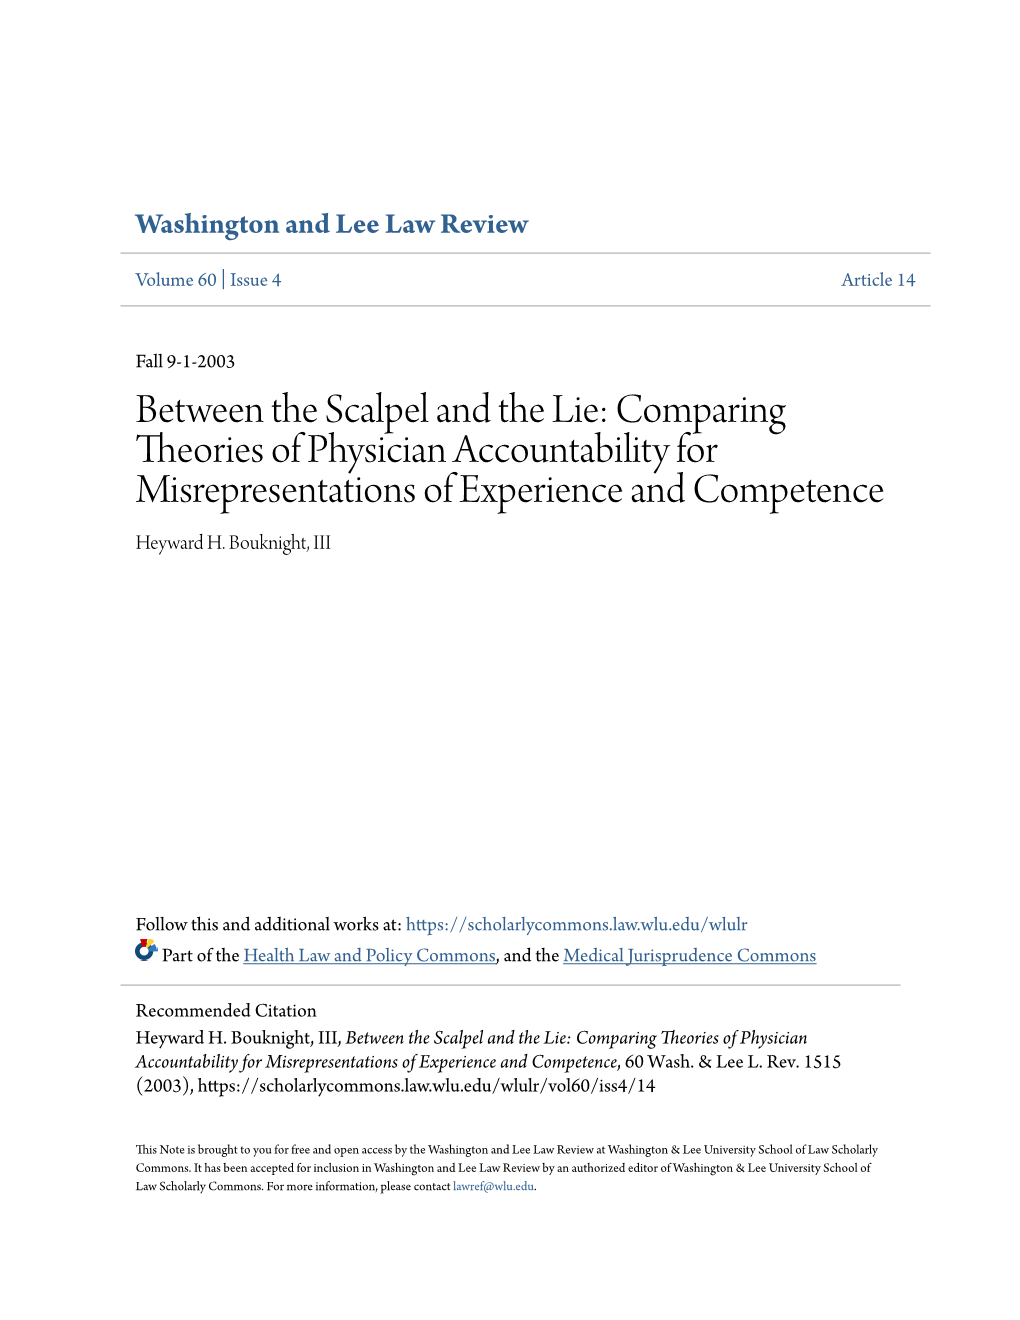 Between the Scalpel and the Lie: Comparing Theories of Physician Accountability for Misrepresentations of Experience and Competence Heyward H